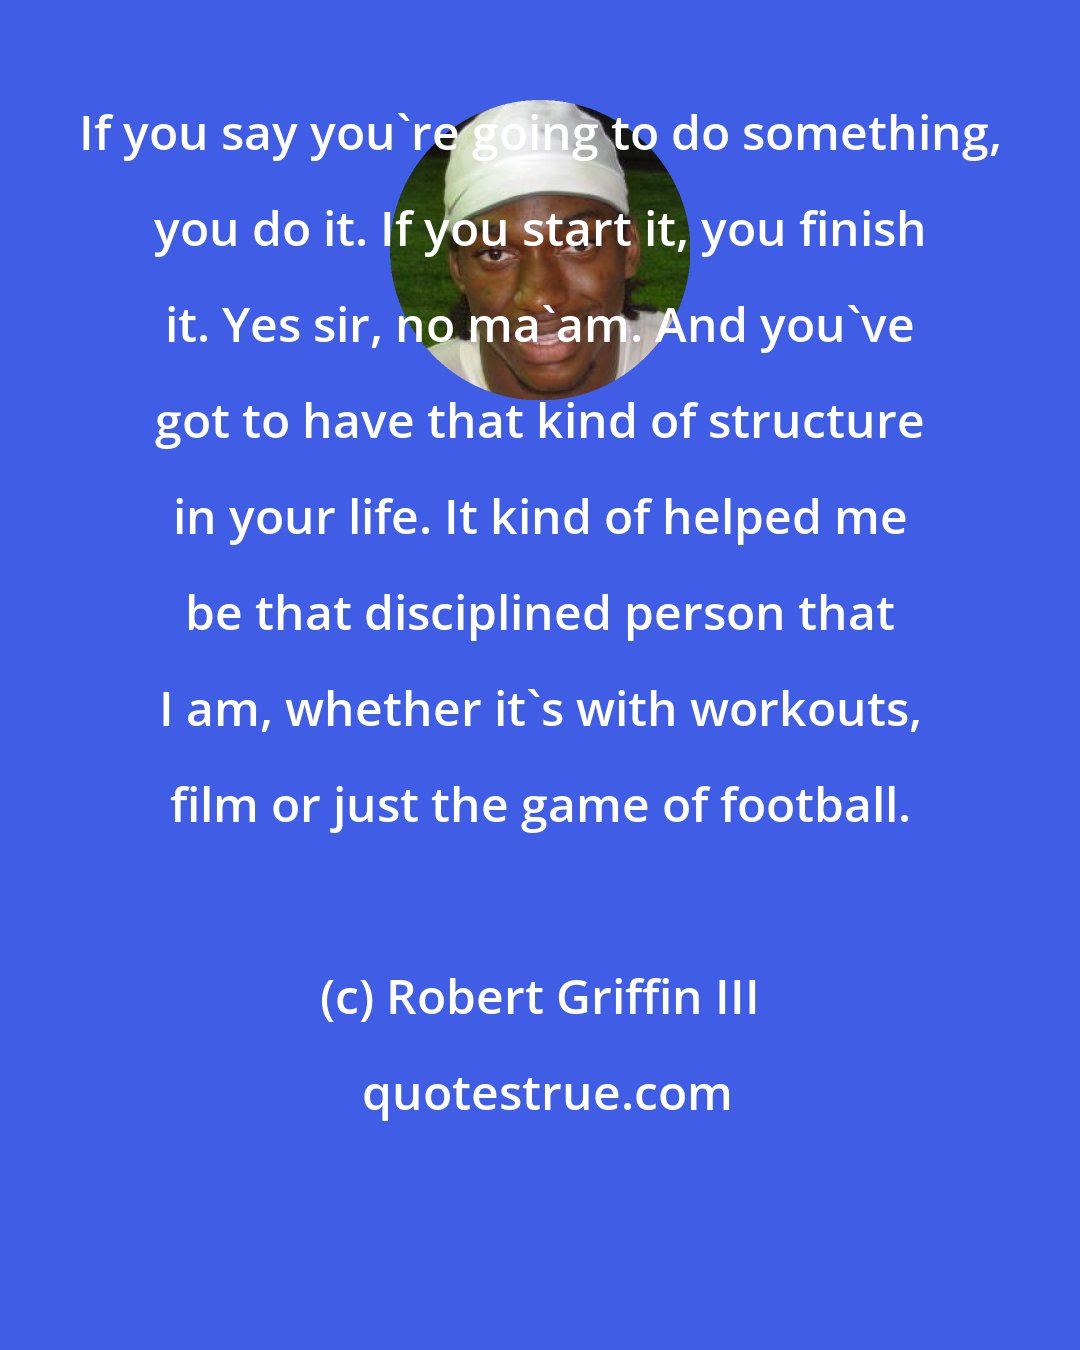 Robert Griffin III: If you say you're going to do something, you do it. If you start it, you finish it. Yes sir, no ma'am. And you've got to have that kind of structure in your life. It kind of helped me be that disciplined person that I am, whether it's with workouts, film or just the game of football.